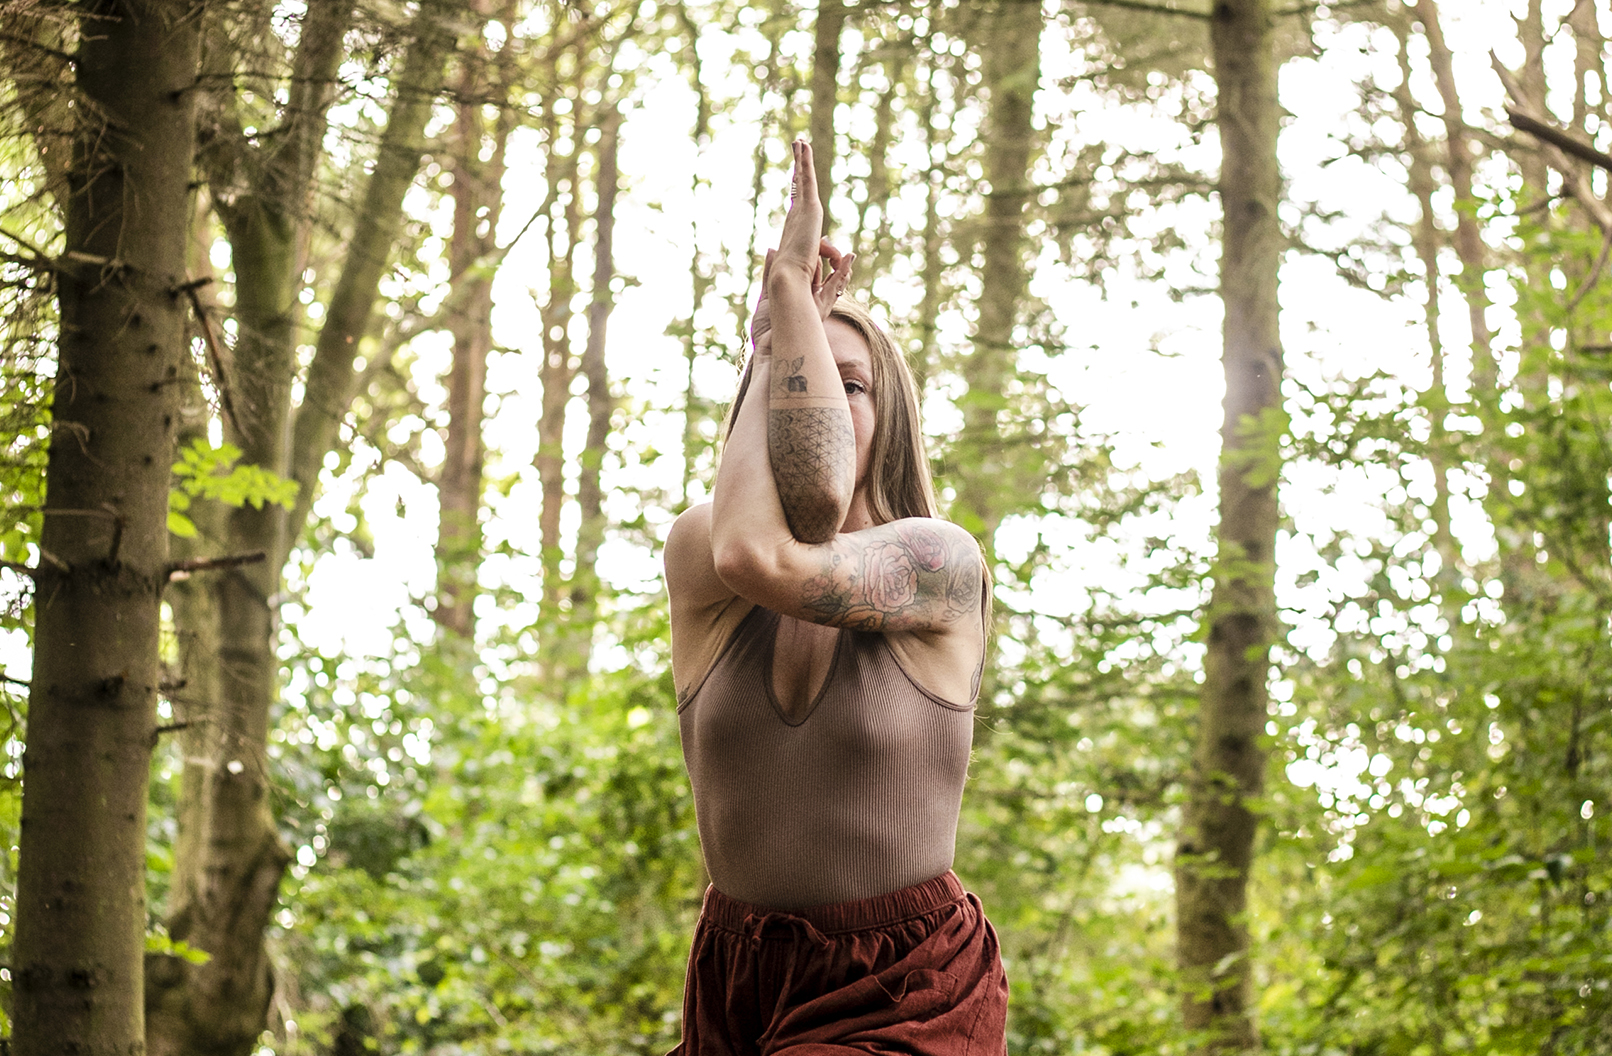 White female crossing tattooed arms over the face in a yoga position. Wearing neutral brown clothes in a woodland area